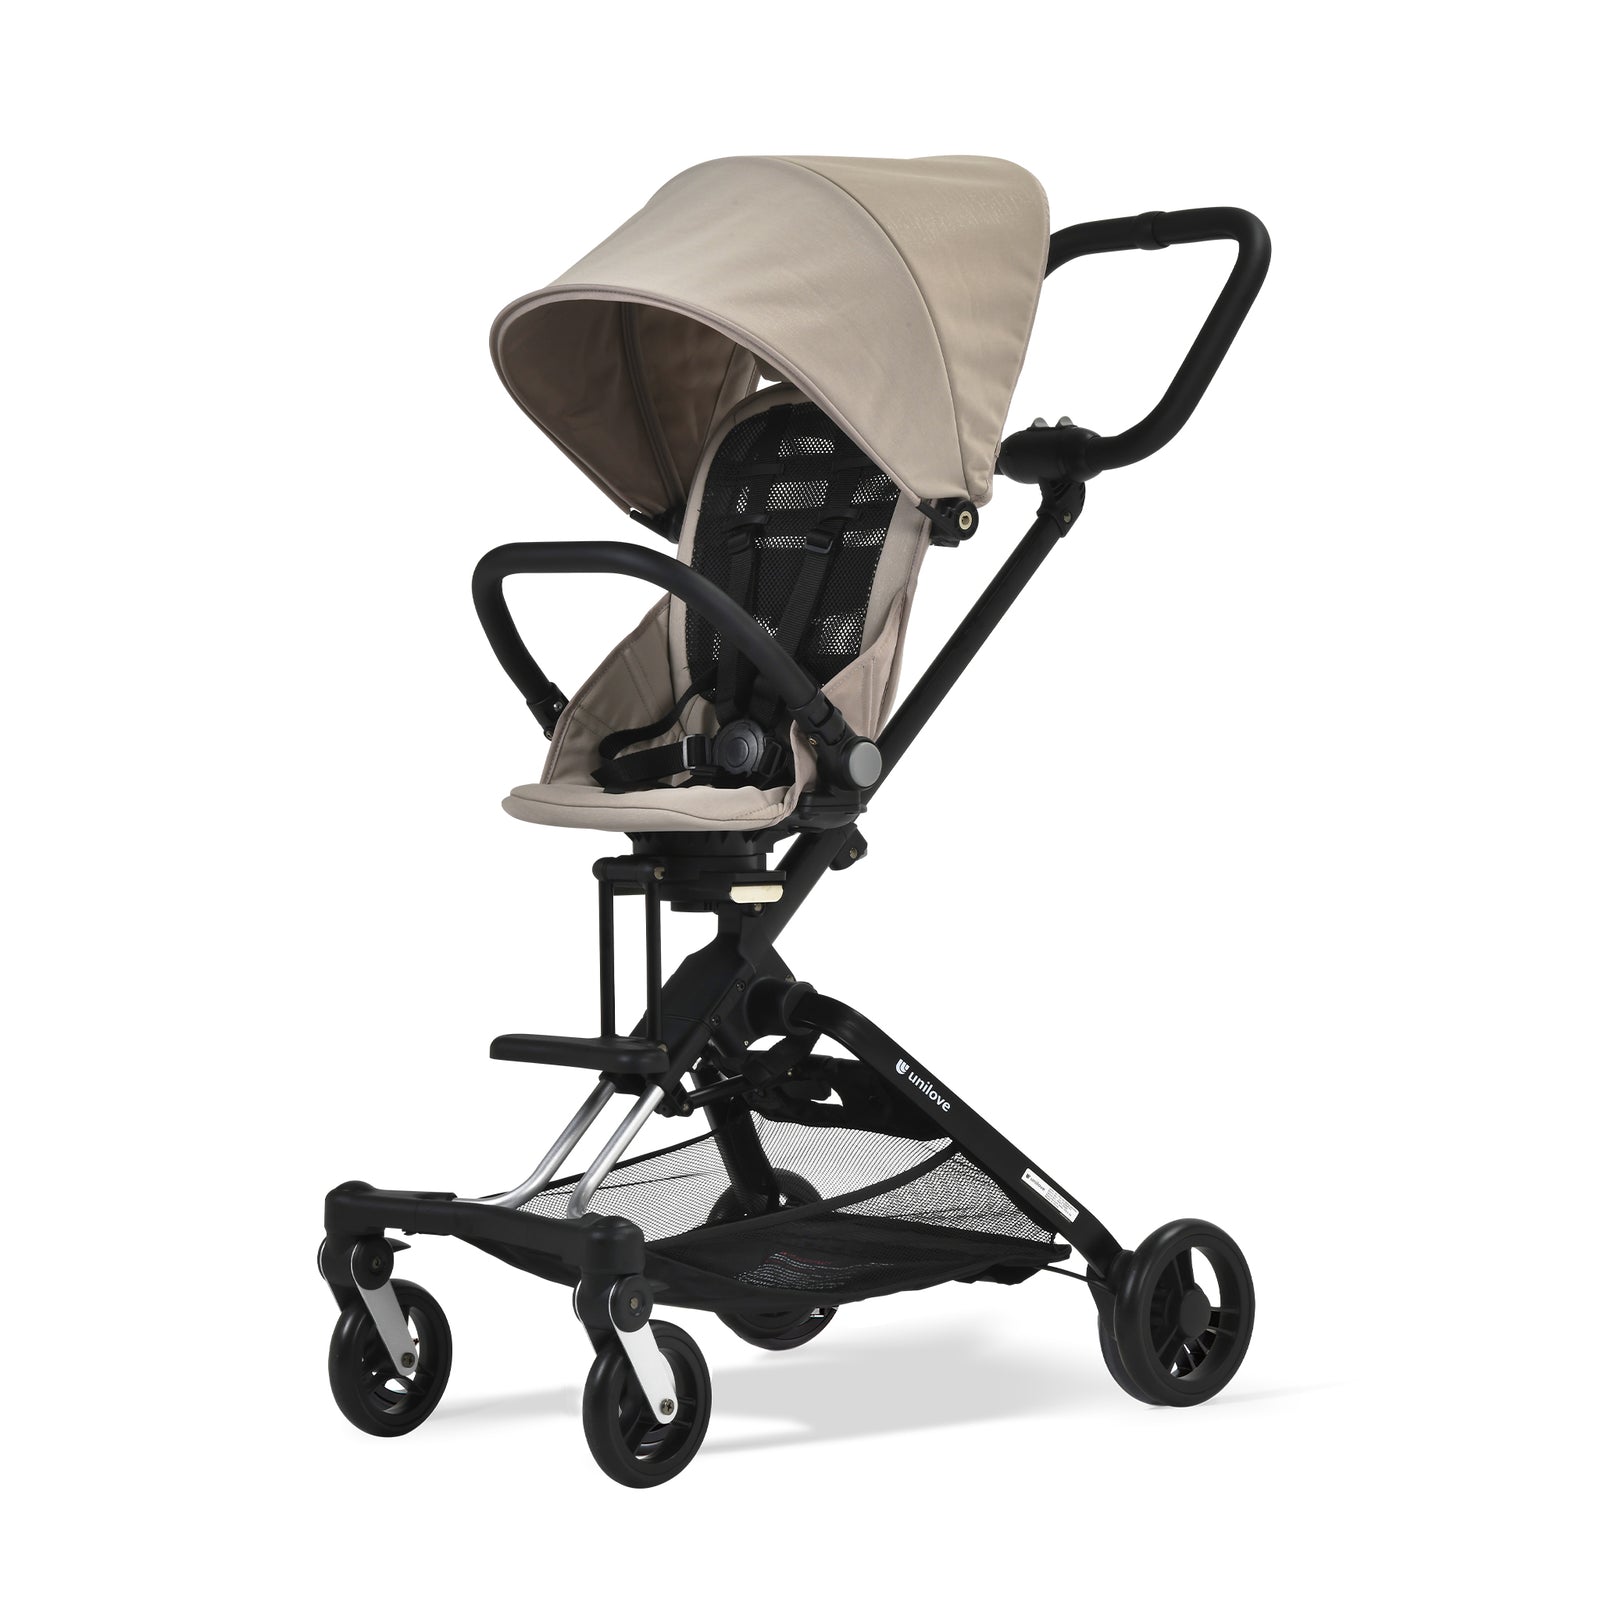 Unilove On The Go 3-In-1 Frame Stroller with Reversible Toddler Seat